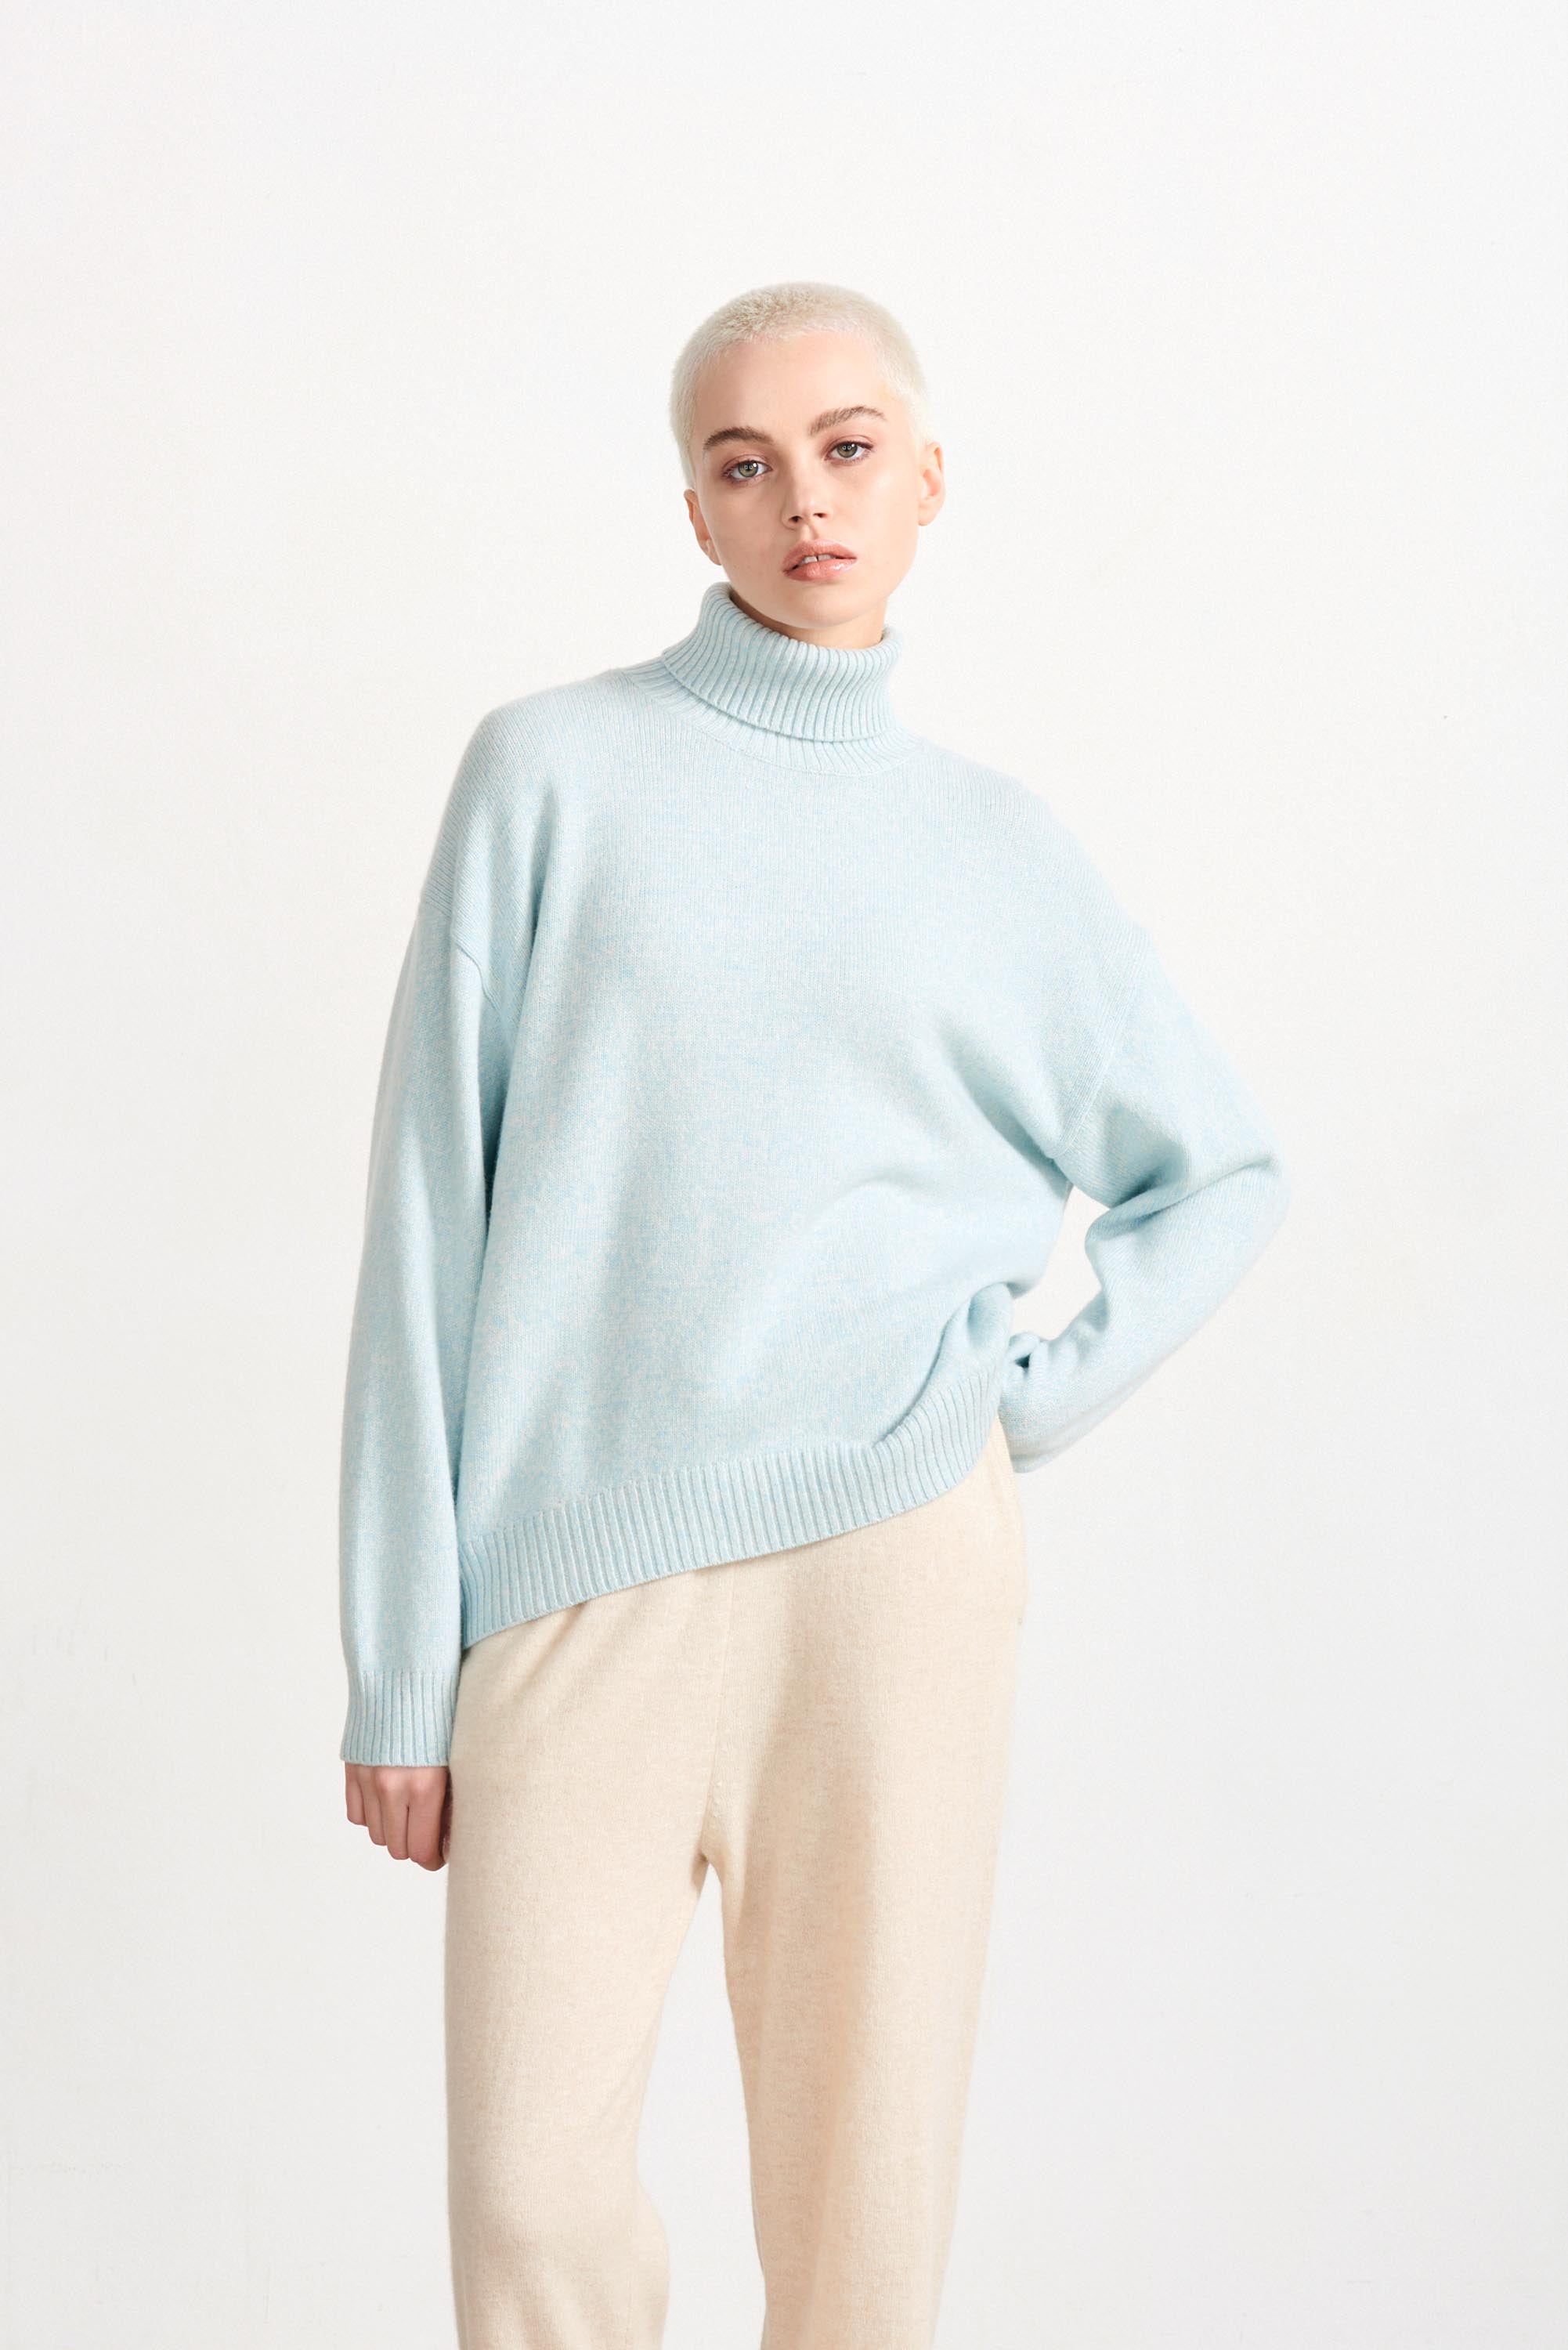 Blonde haired female model wearing Jumper 1234 cashmere and wool heavier weight oversized roll neck jumper in ice blue marl